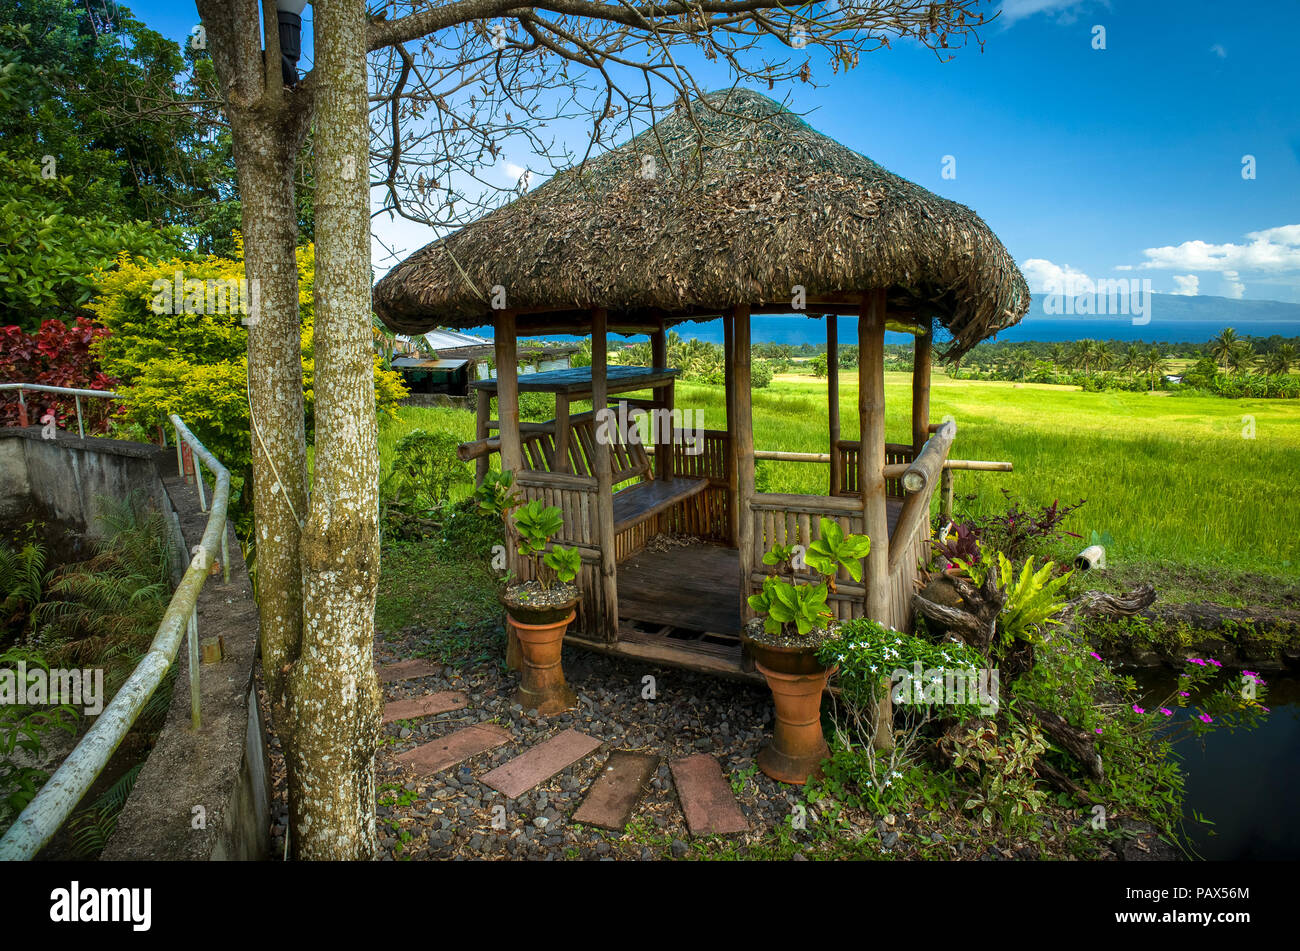 A bamboo hut with seats to shade rice farmers from sun - Albay, Bicol - Philippines Stock Photo